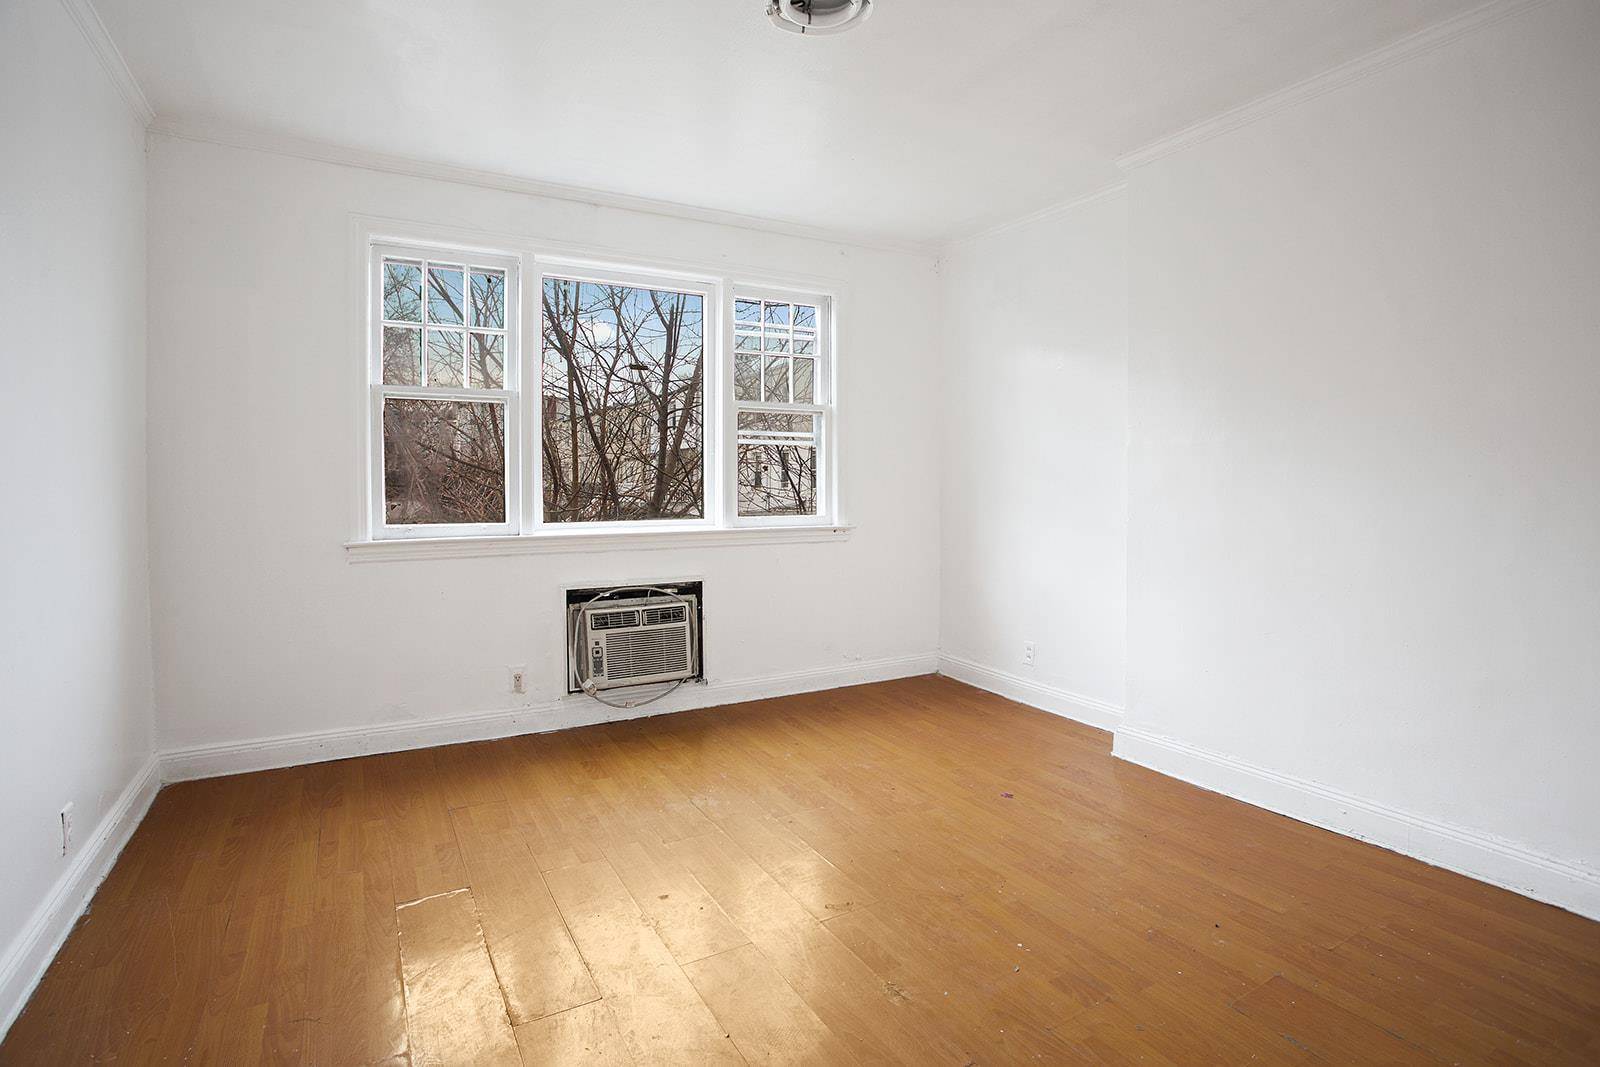 Welcome to this tree line beautiful brick 2 family home located in the center of Astoria, Ditmars Steinway neighborhood.